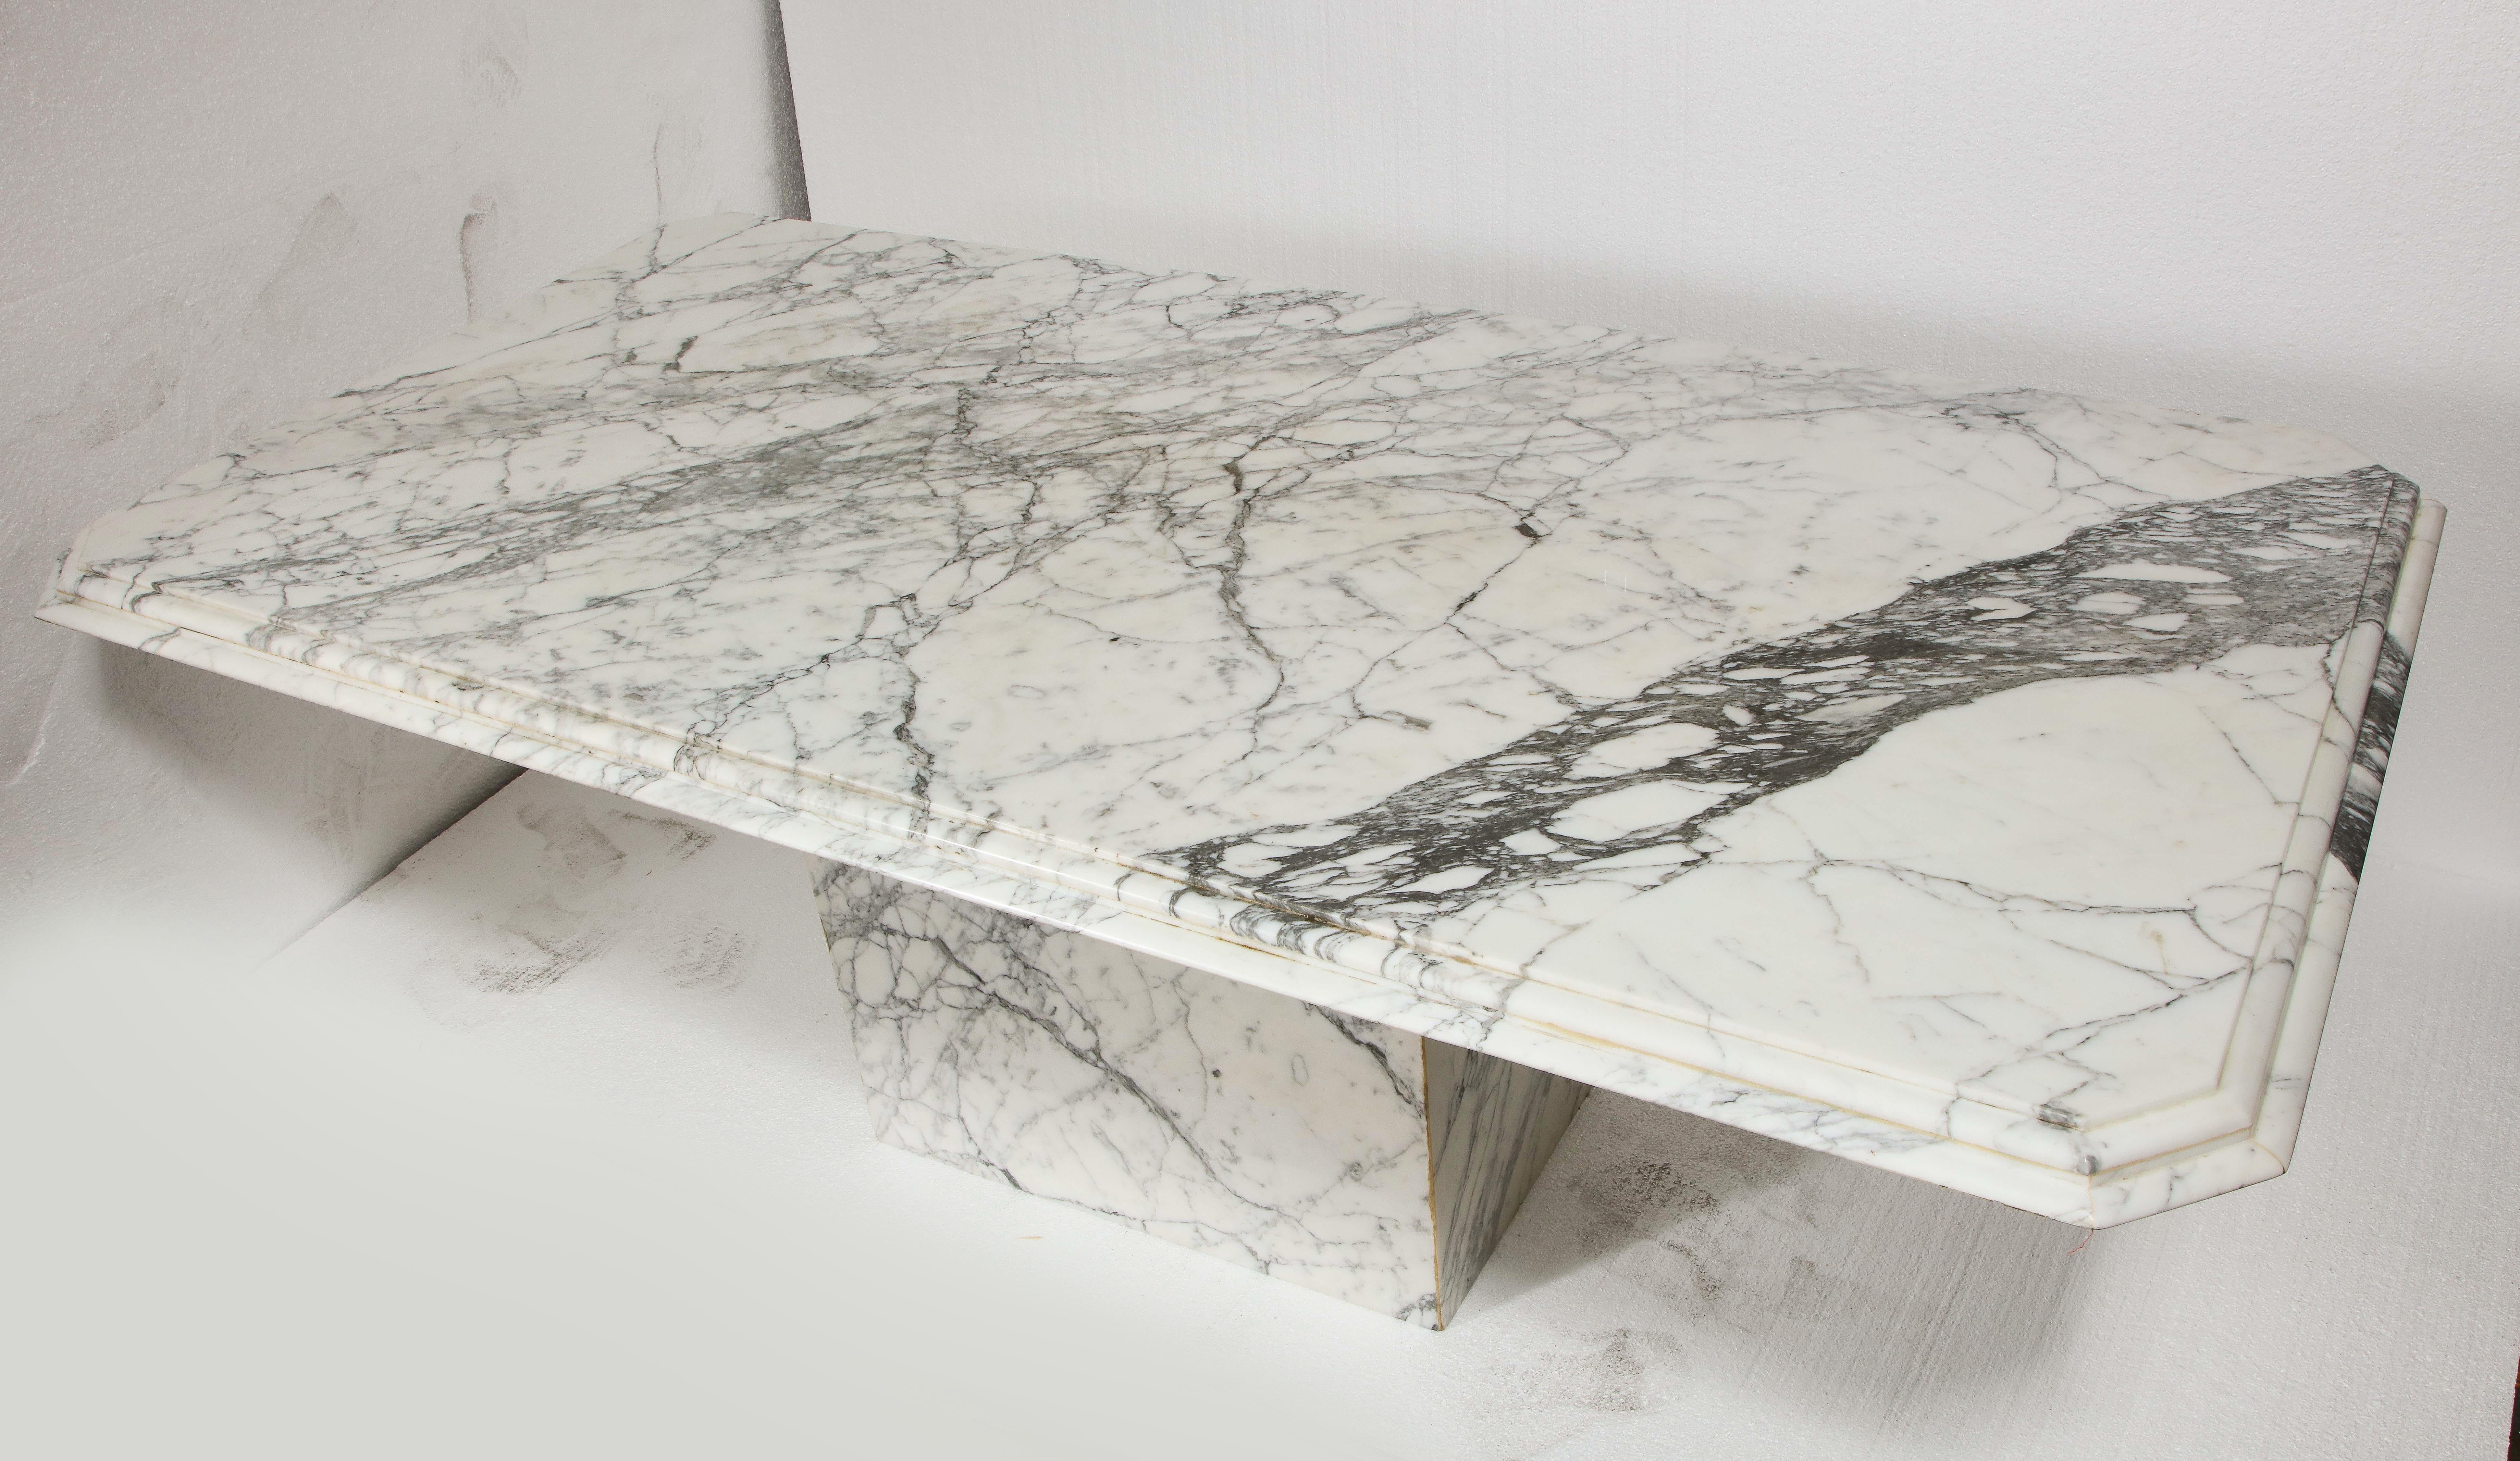 Vintage French rectangular white black marble dining conference table, believed to be from 1970s.

Huge marble table. Incredible veining throughout. Heavy and sturdy. 1 of a kind.